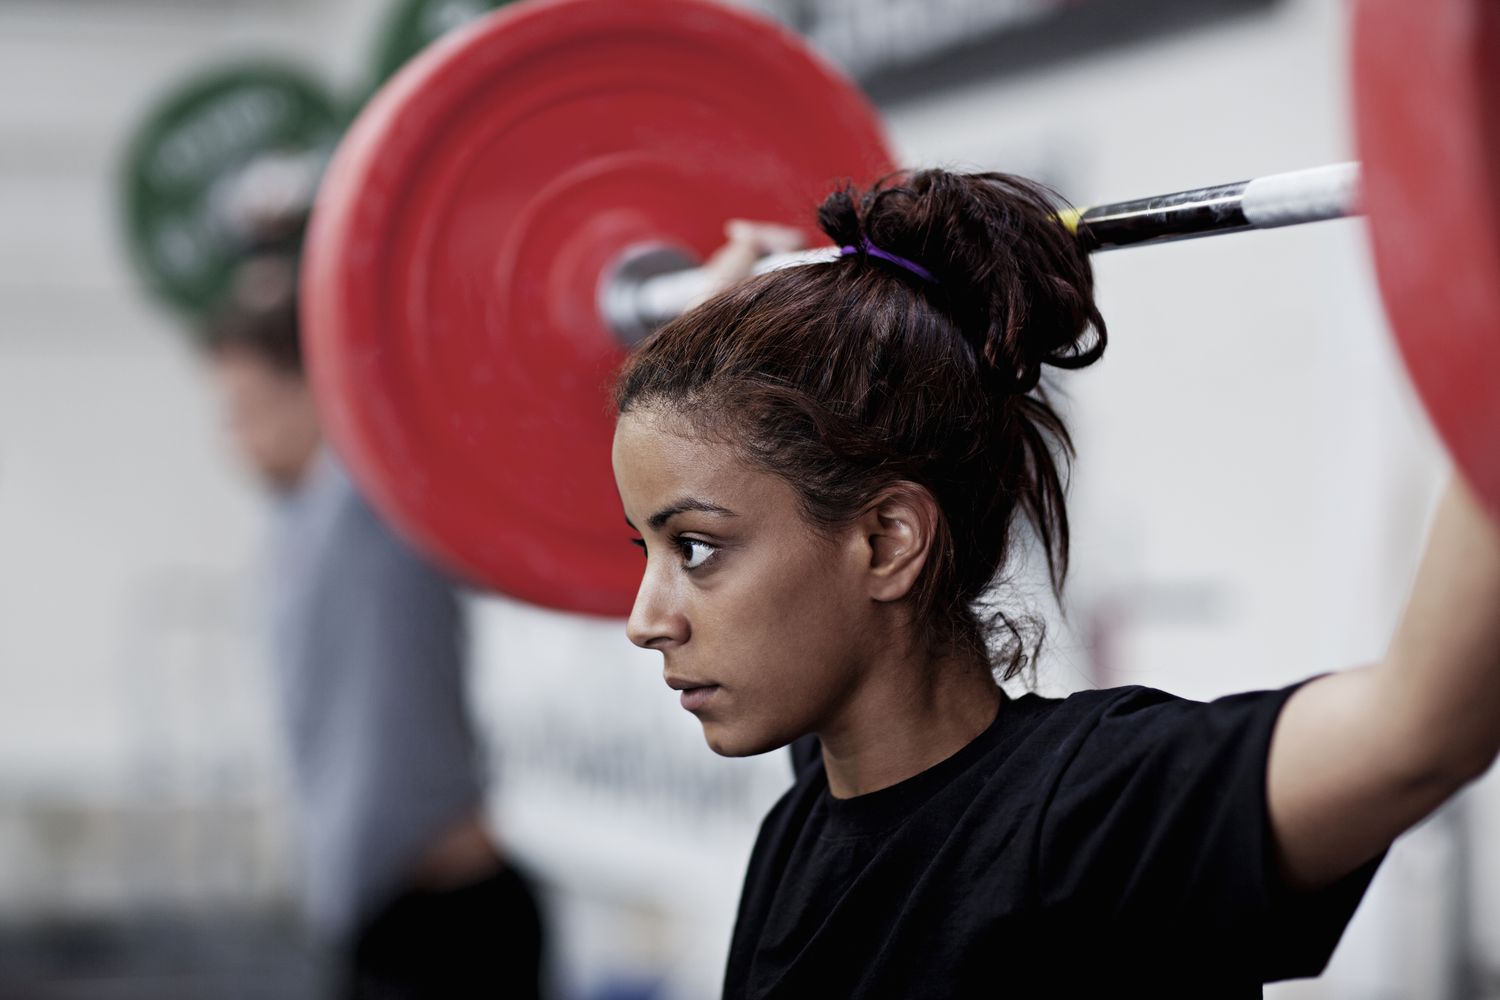 Young woman lifting weight